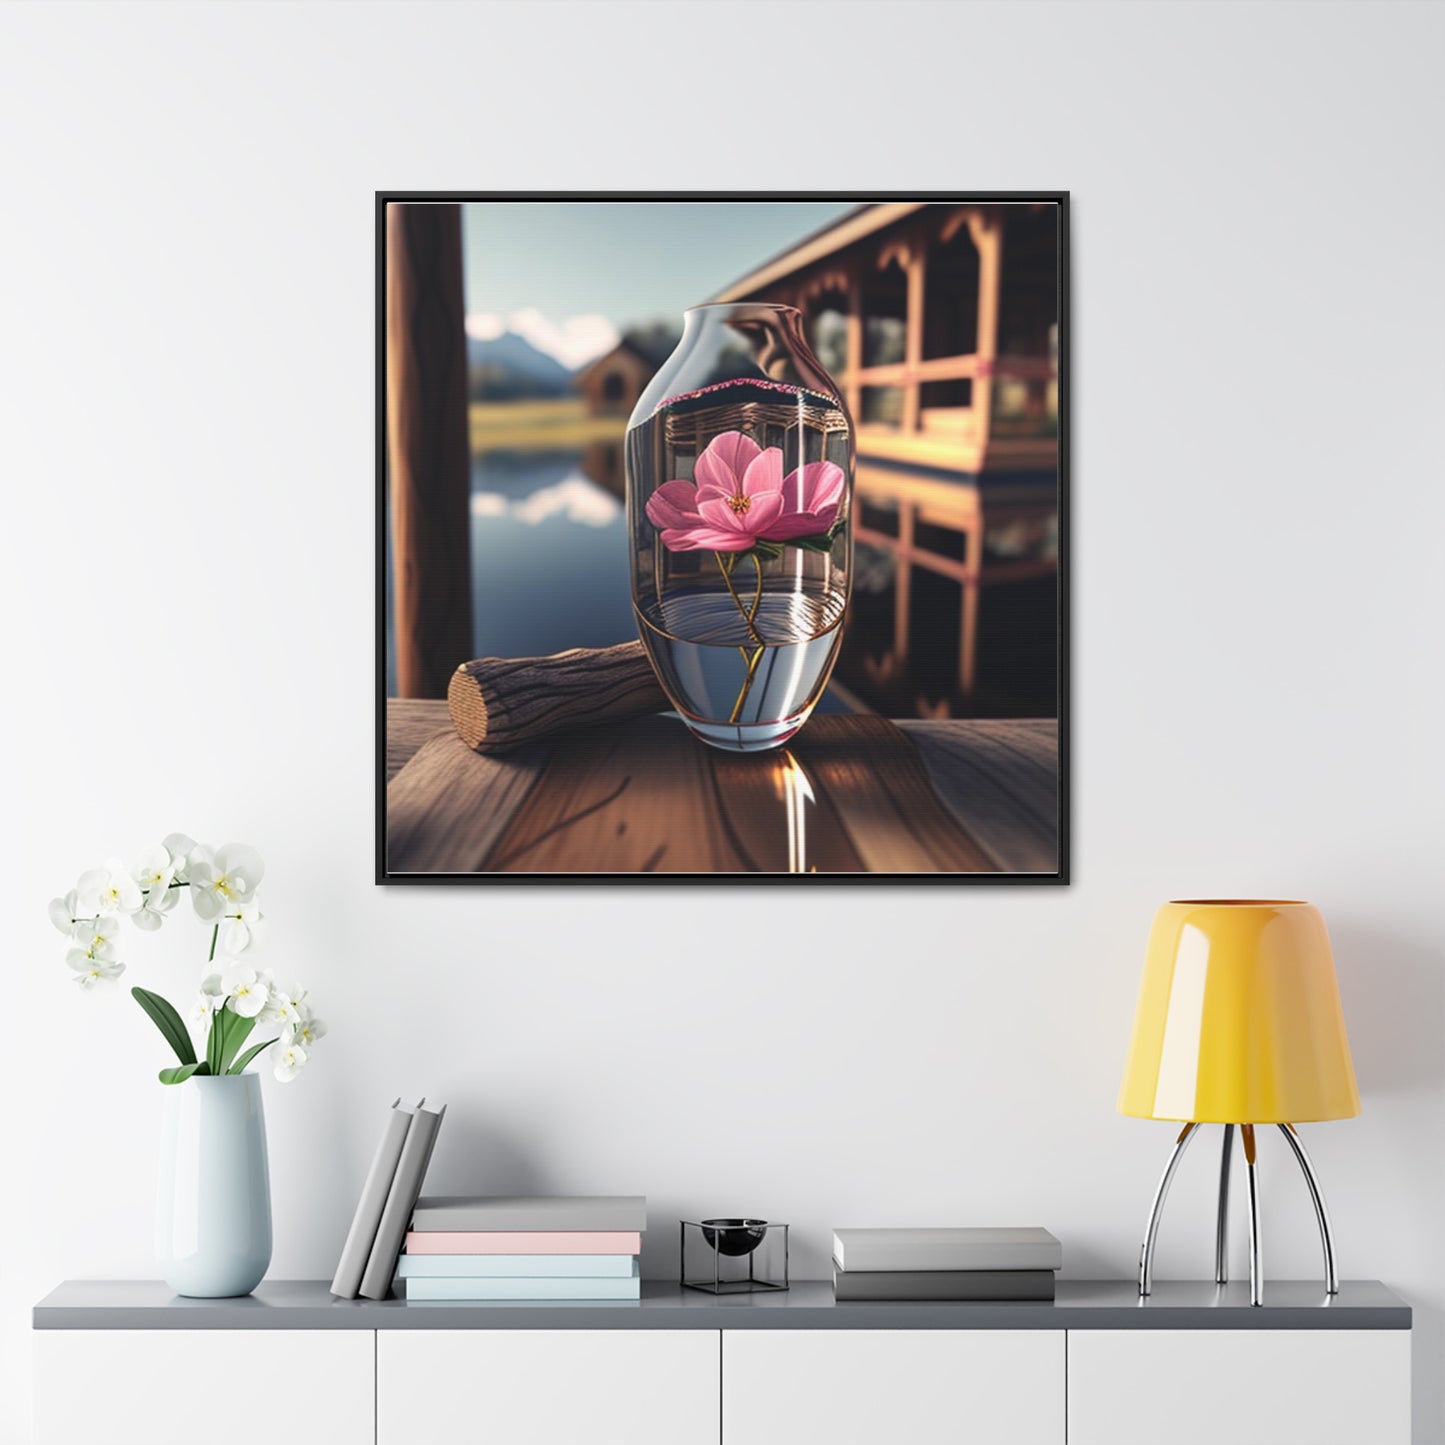 Gallery Canvas Wraps, Square Frame Pink Magnolia 4